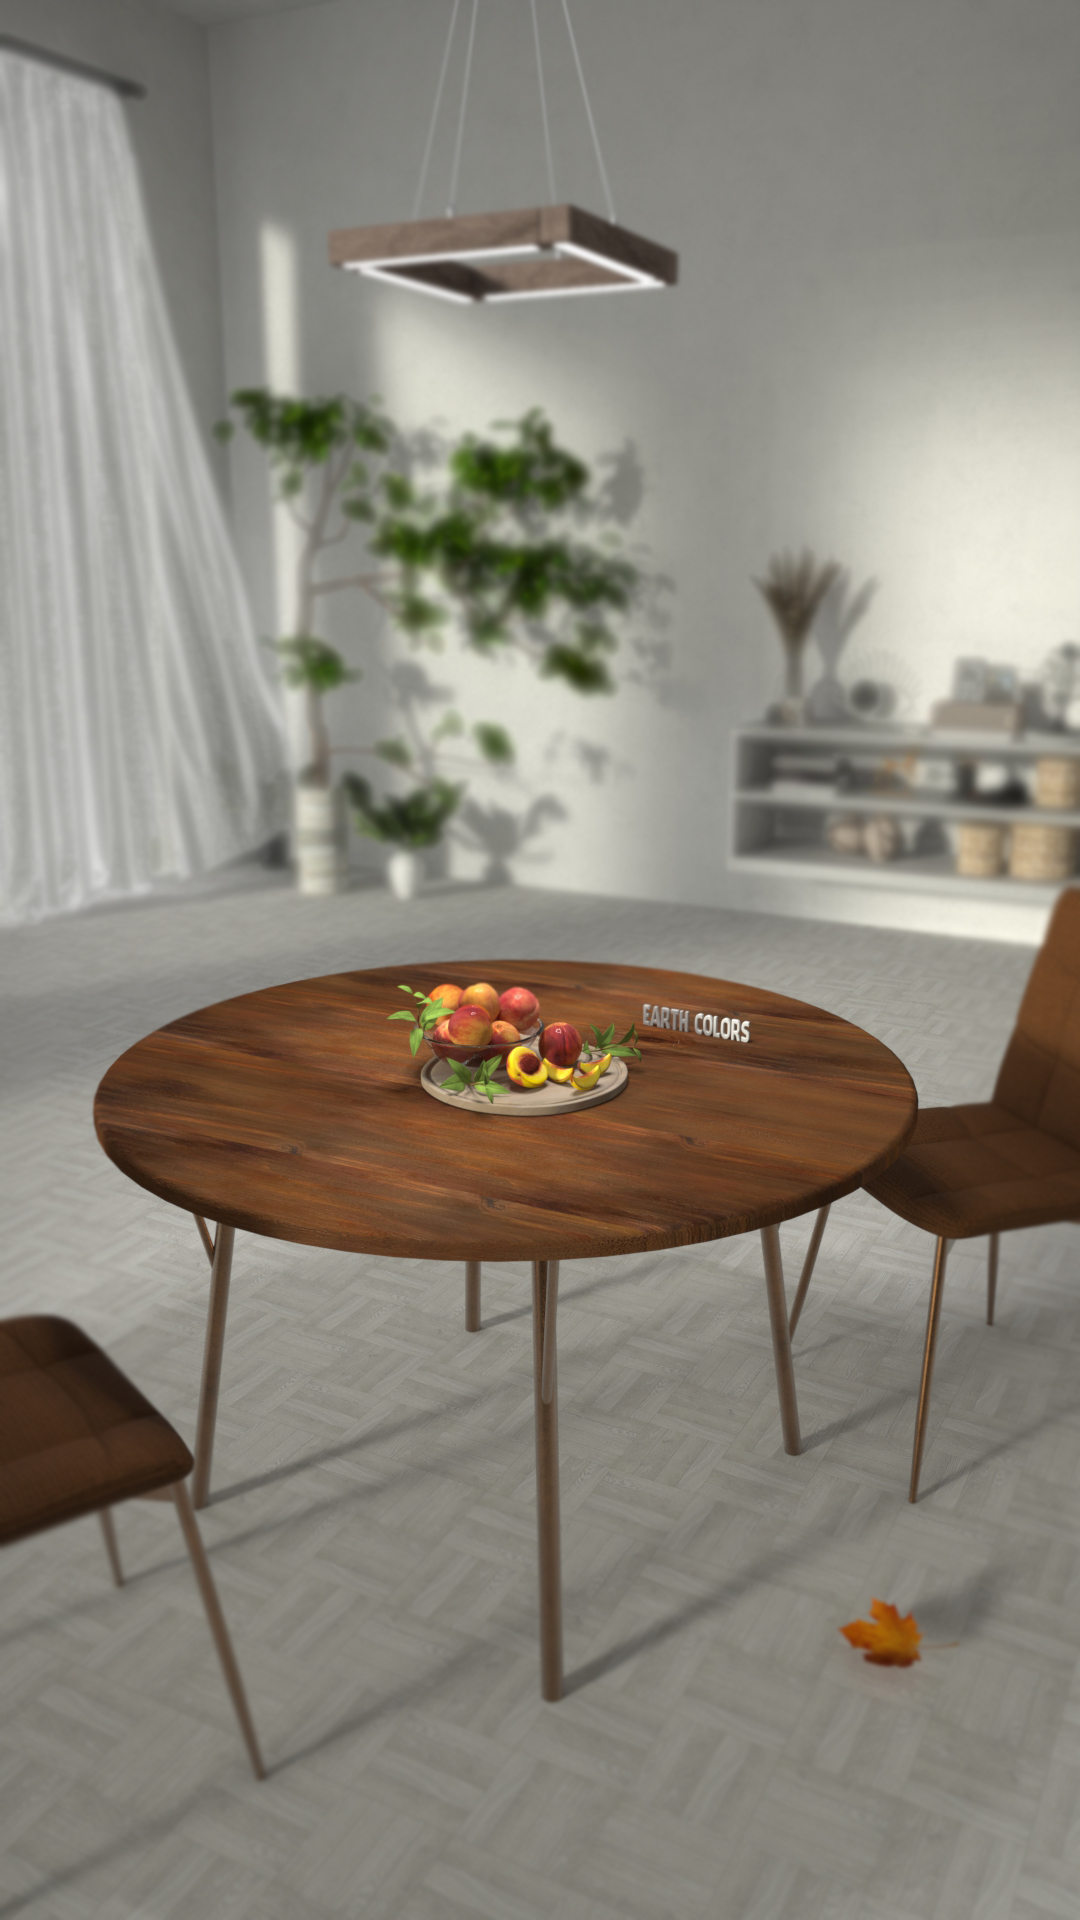 Small wooden dining tables